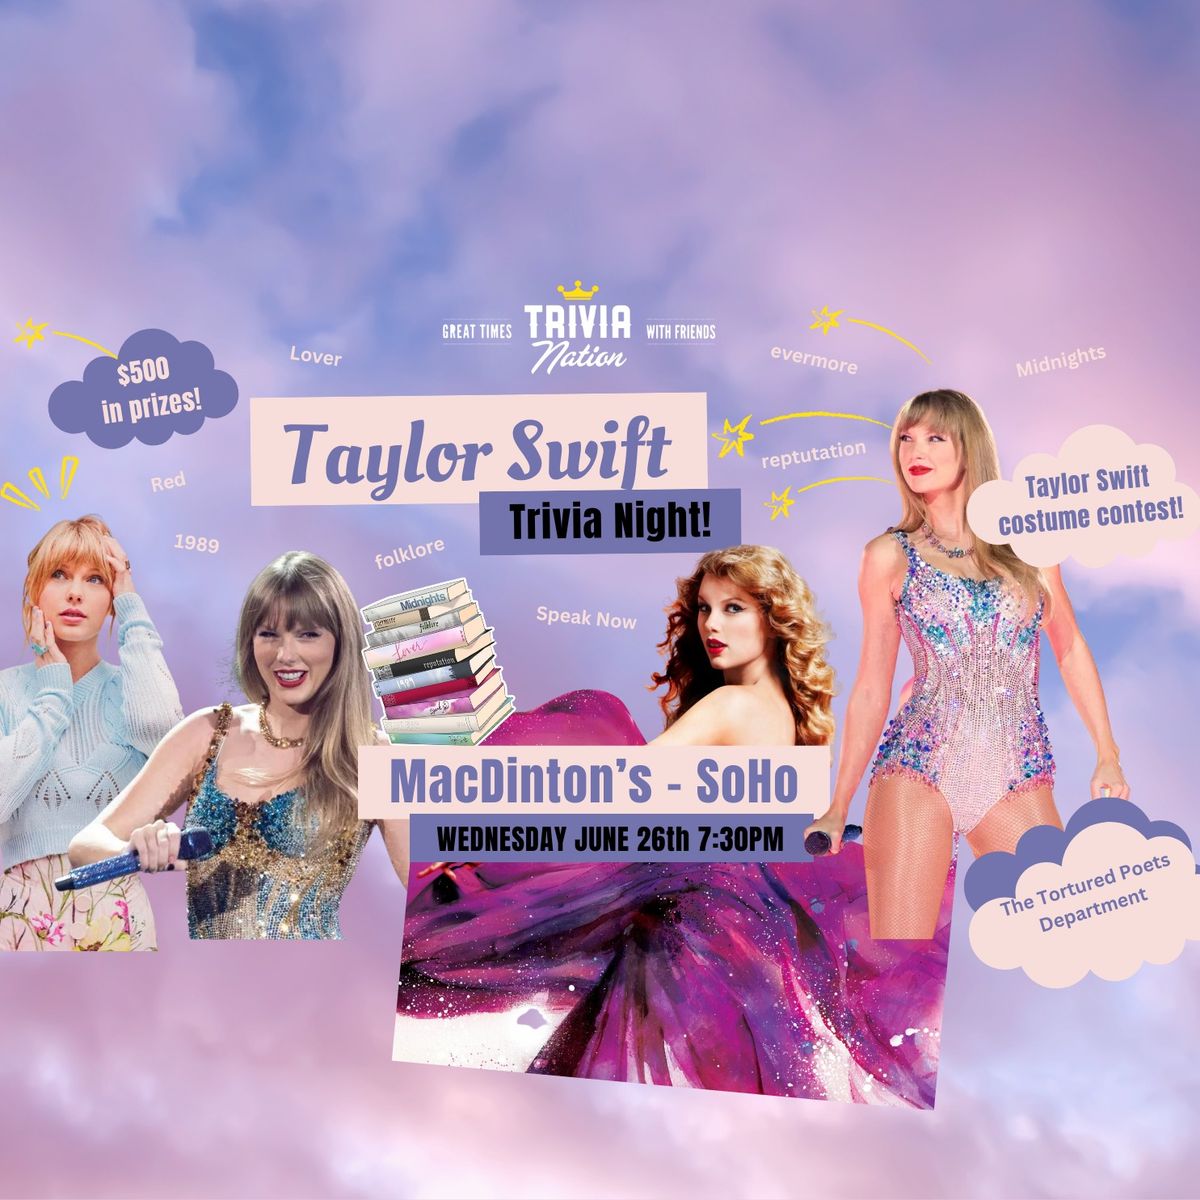 Taylor Swift Trivia Night at MacDinton's SoHo Tampa! $500 in Prizes & Costume Contest